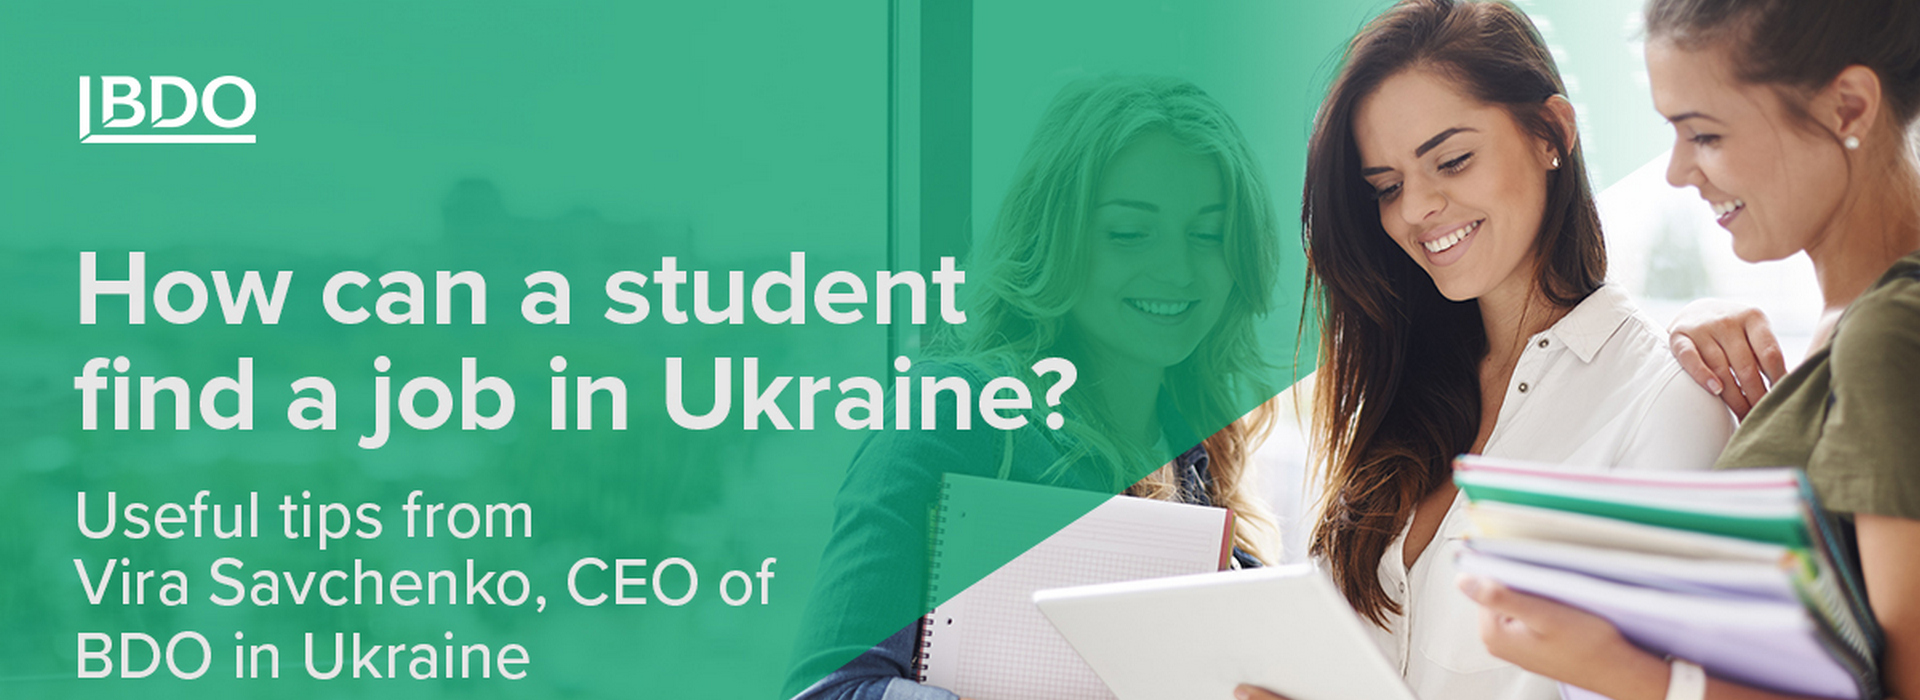 How Can a Student Find a Job in Ukraine? Useful Tips from Vira Savchenko, CEO of BDO in Ukraine